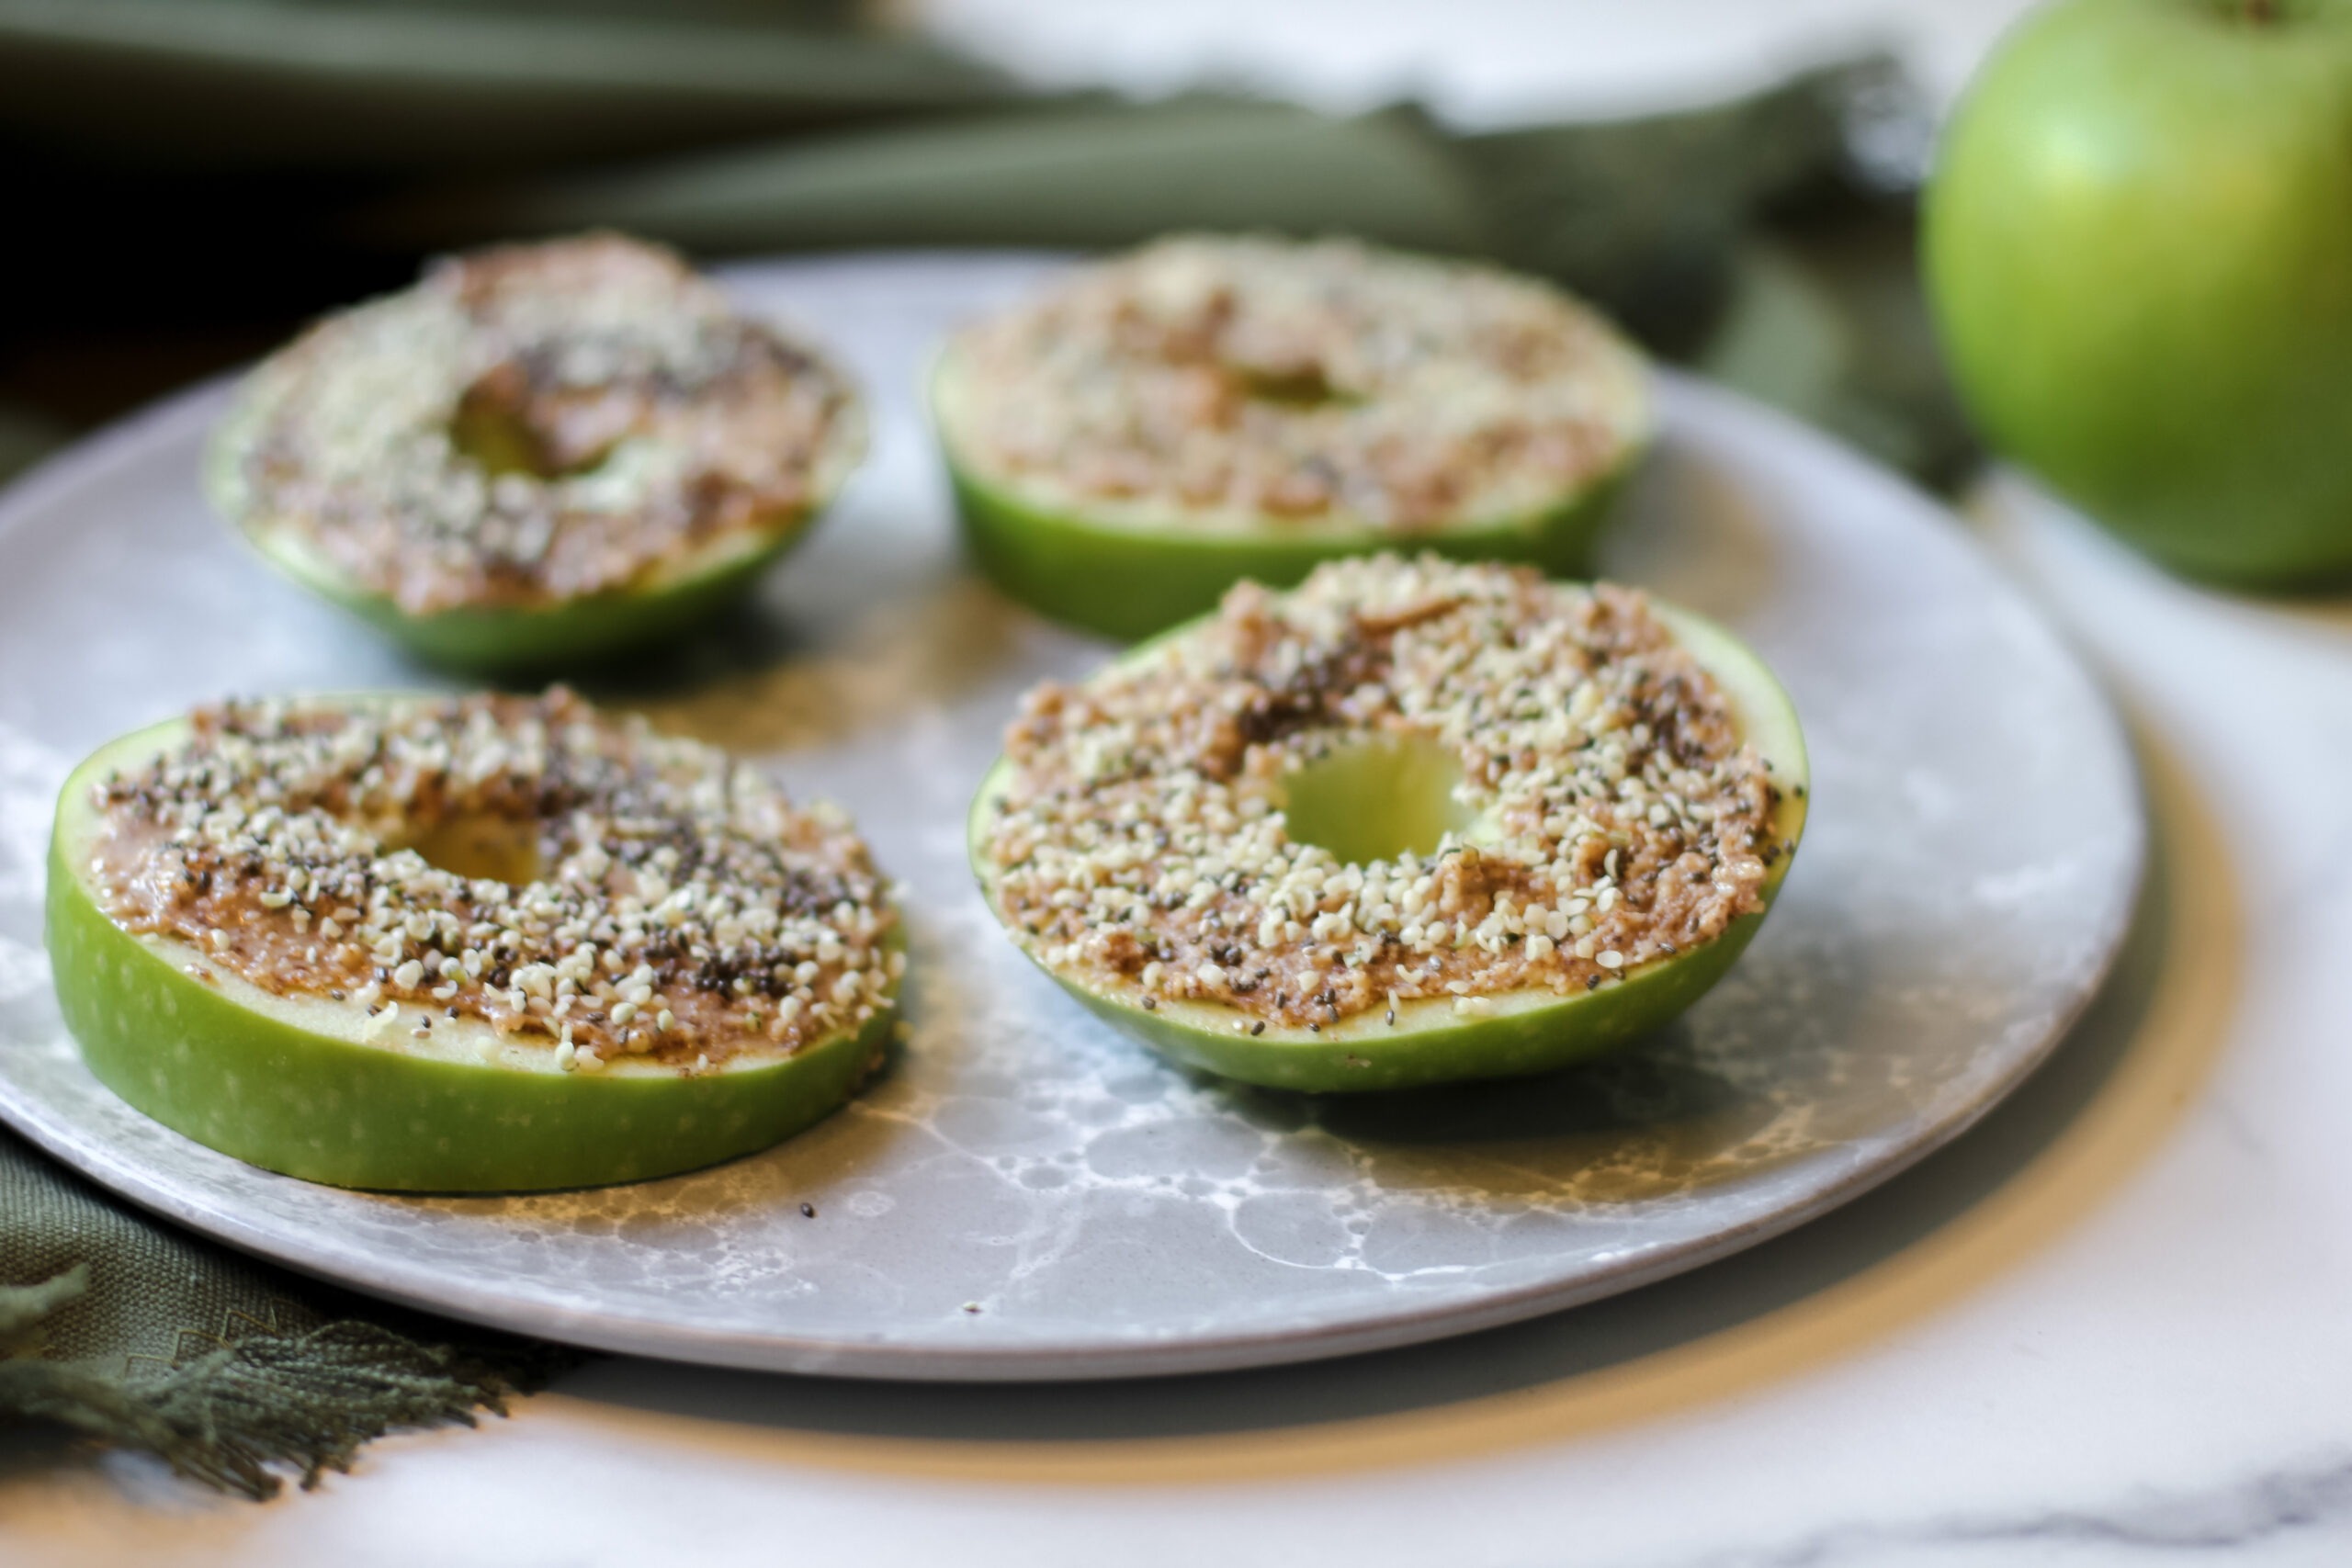 Apple with Almond Butter and Seeds